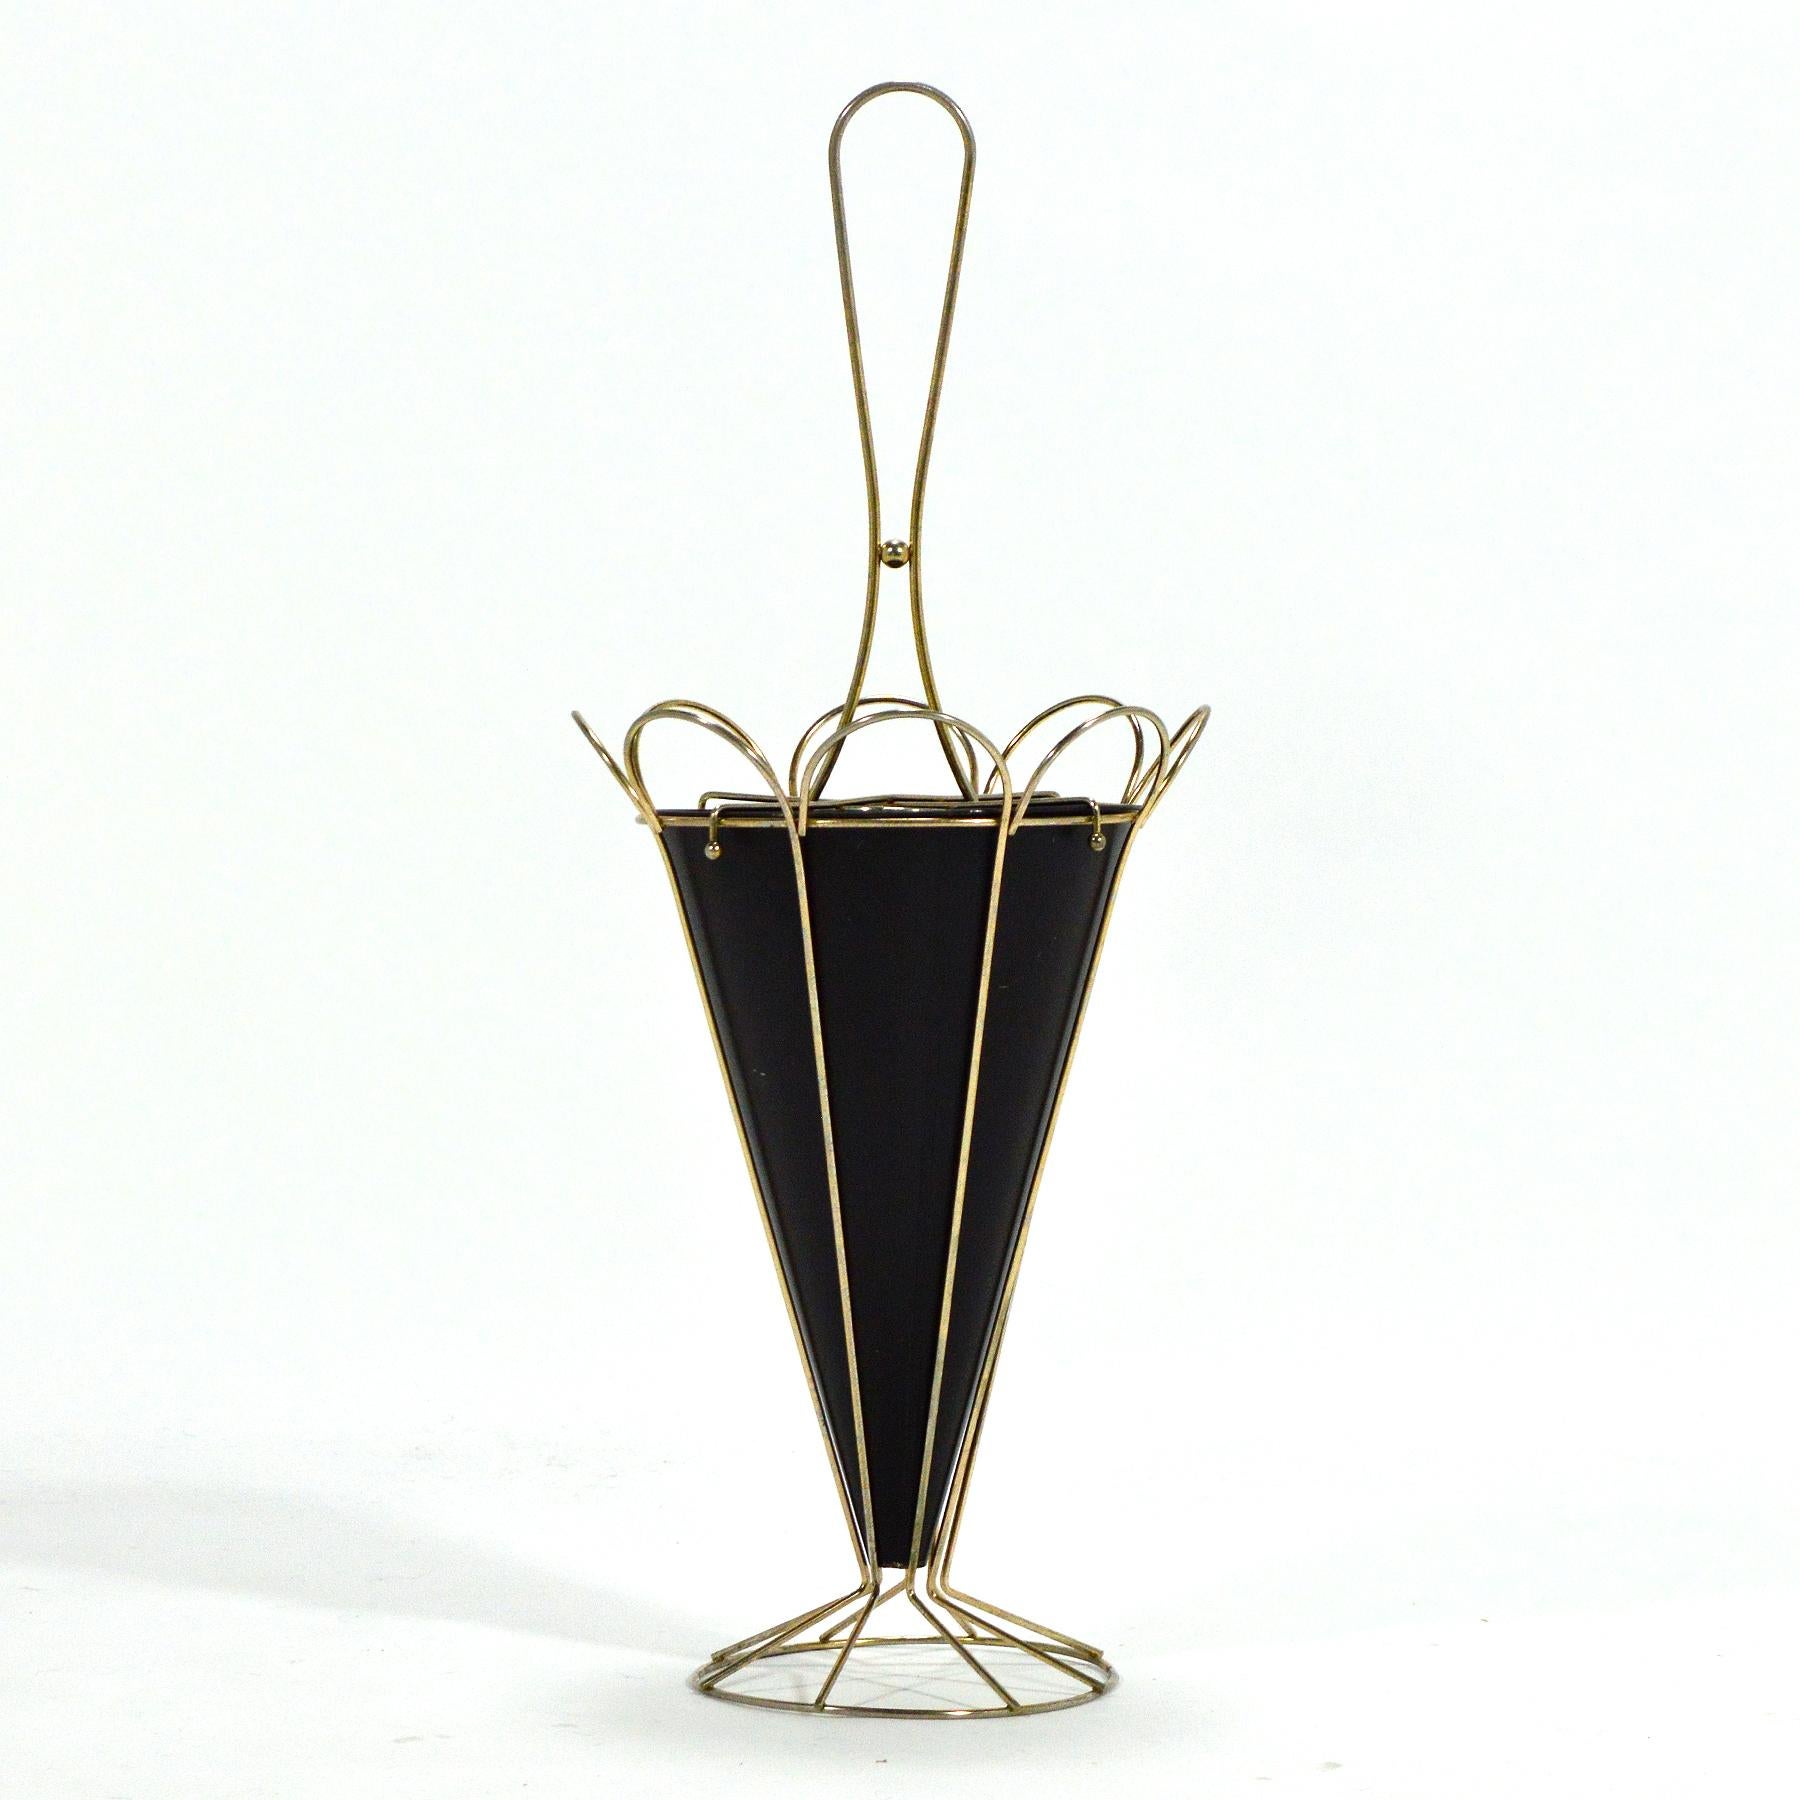 This delightful umbrella stand in brass rod and painted steel is in the form of an abstract umbrella. It is pretty when it is empty, and of course a very useful place to store your umbrellas. We love the playful nature of the design and the light